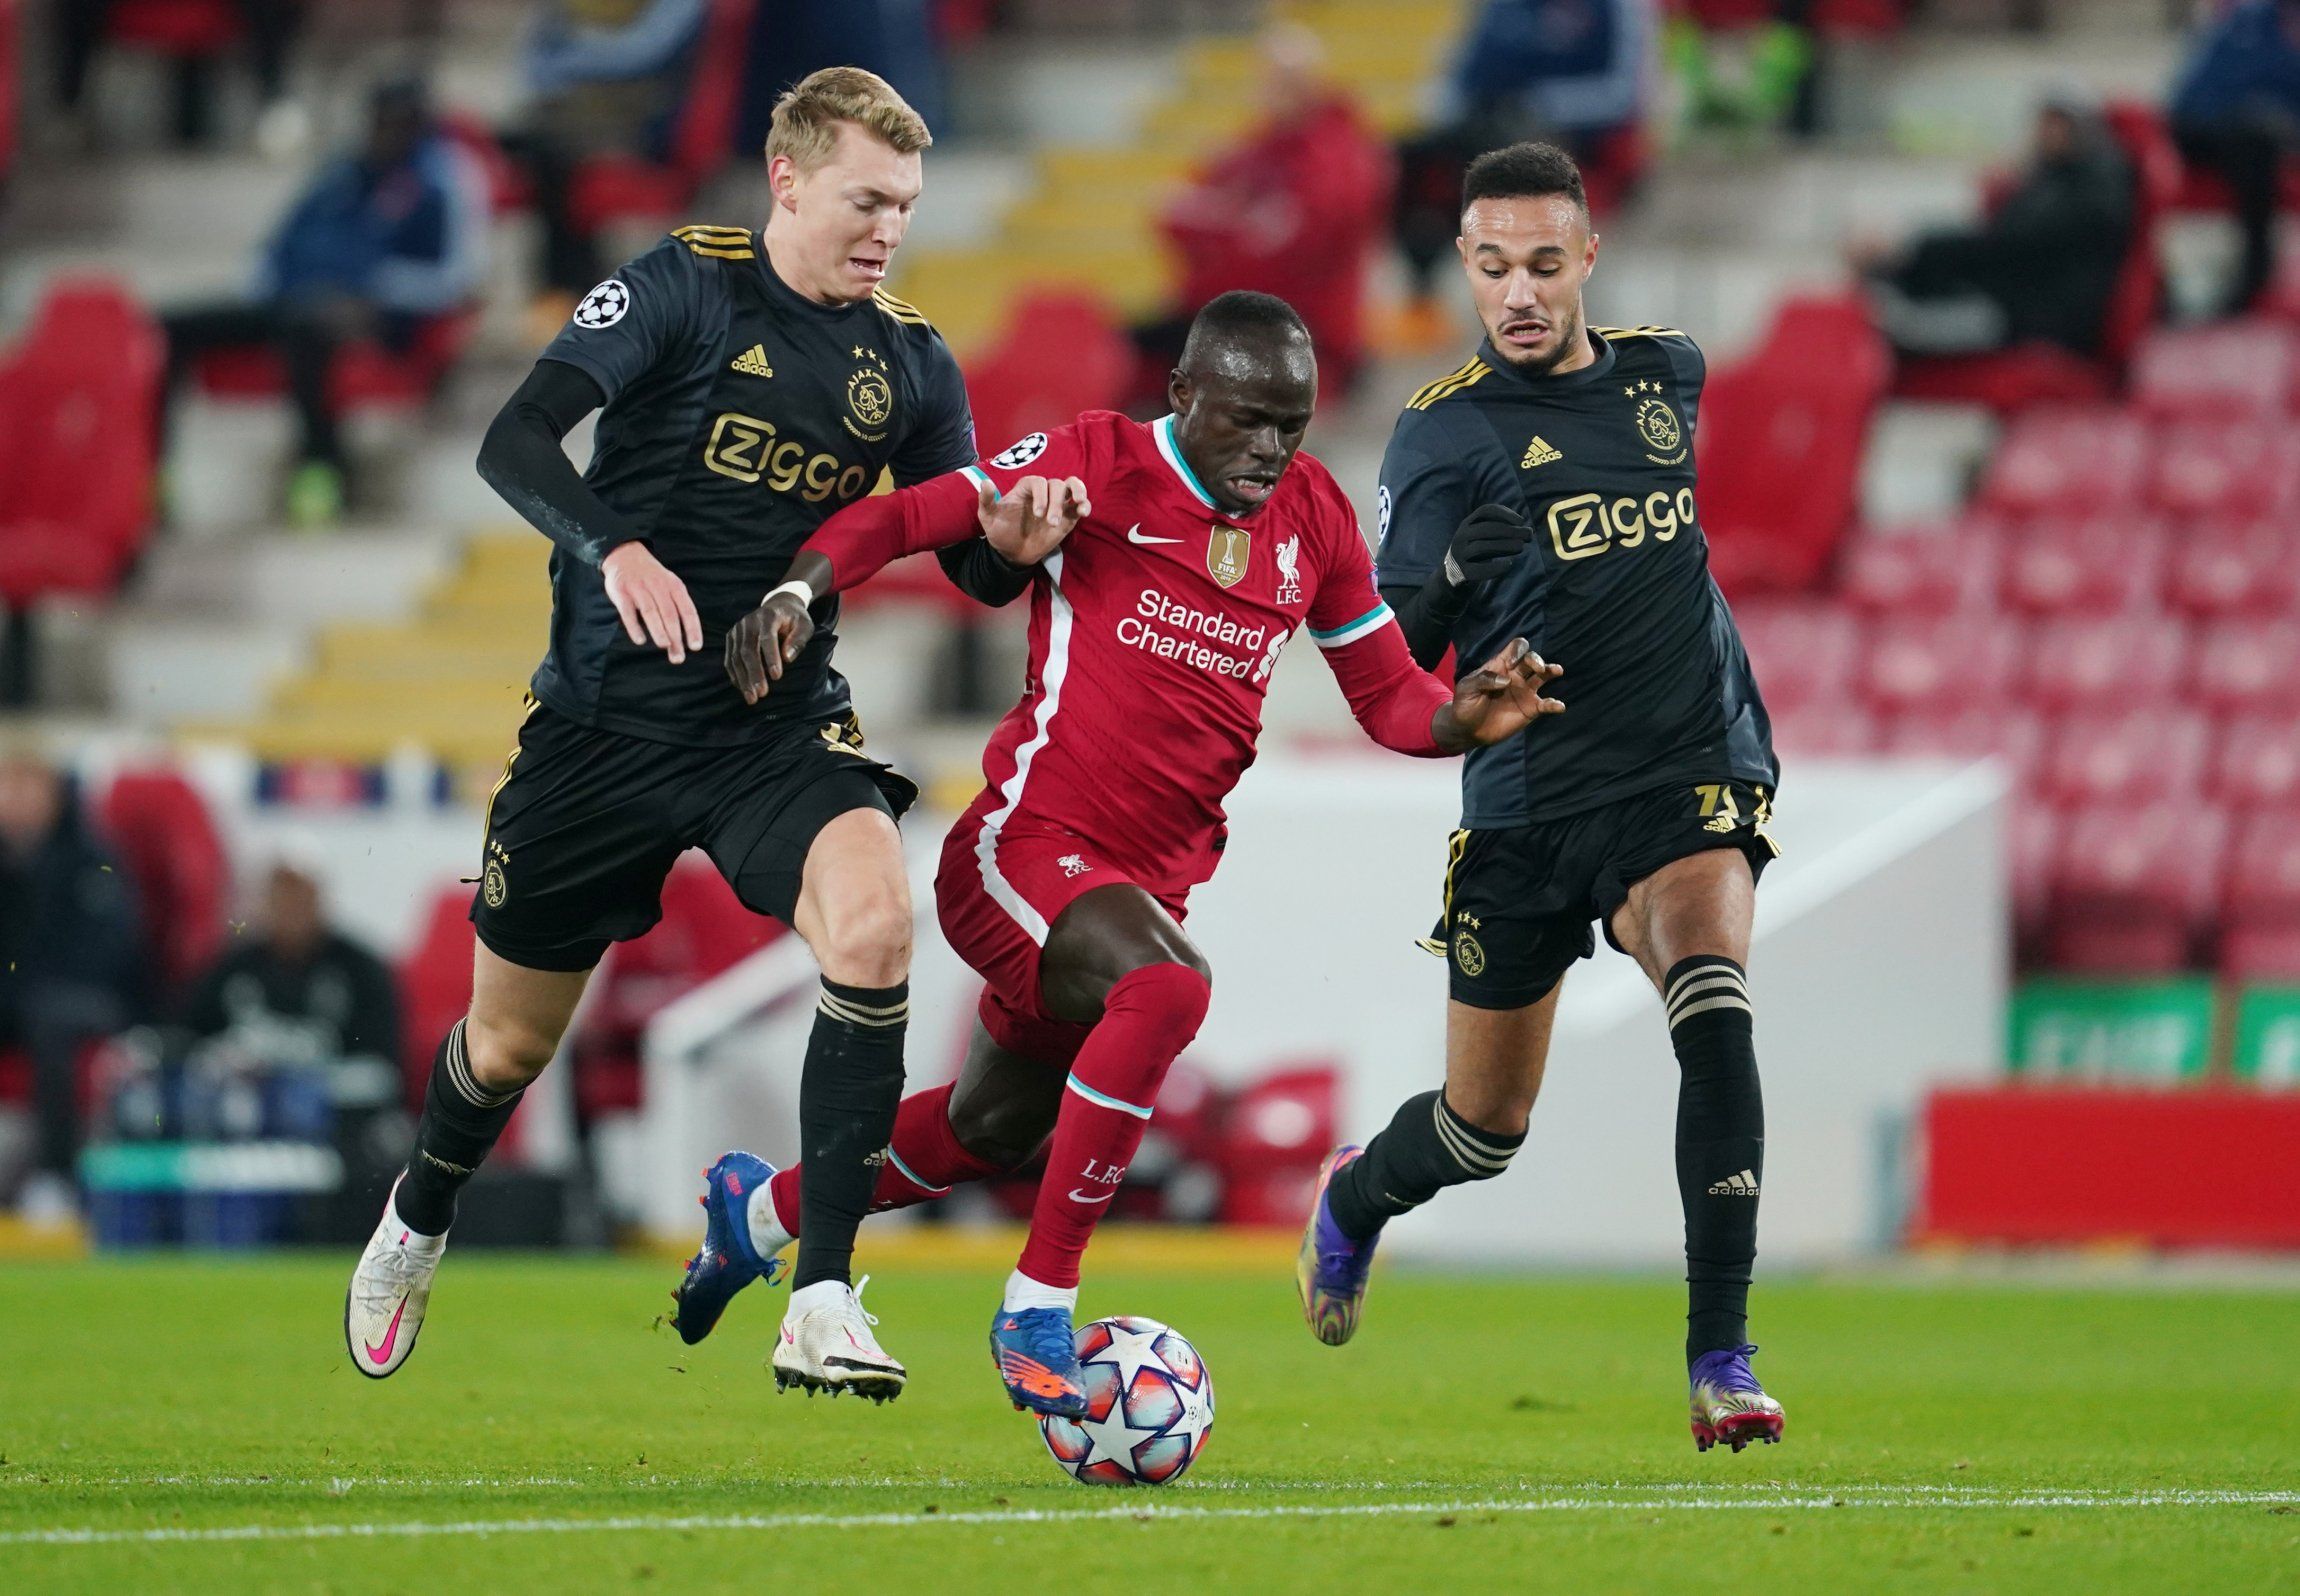 Ajax defender Noussair Mazraoui in action against Liverpool's Sadio Mane in the Champions League